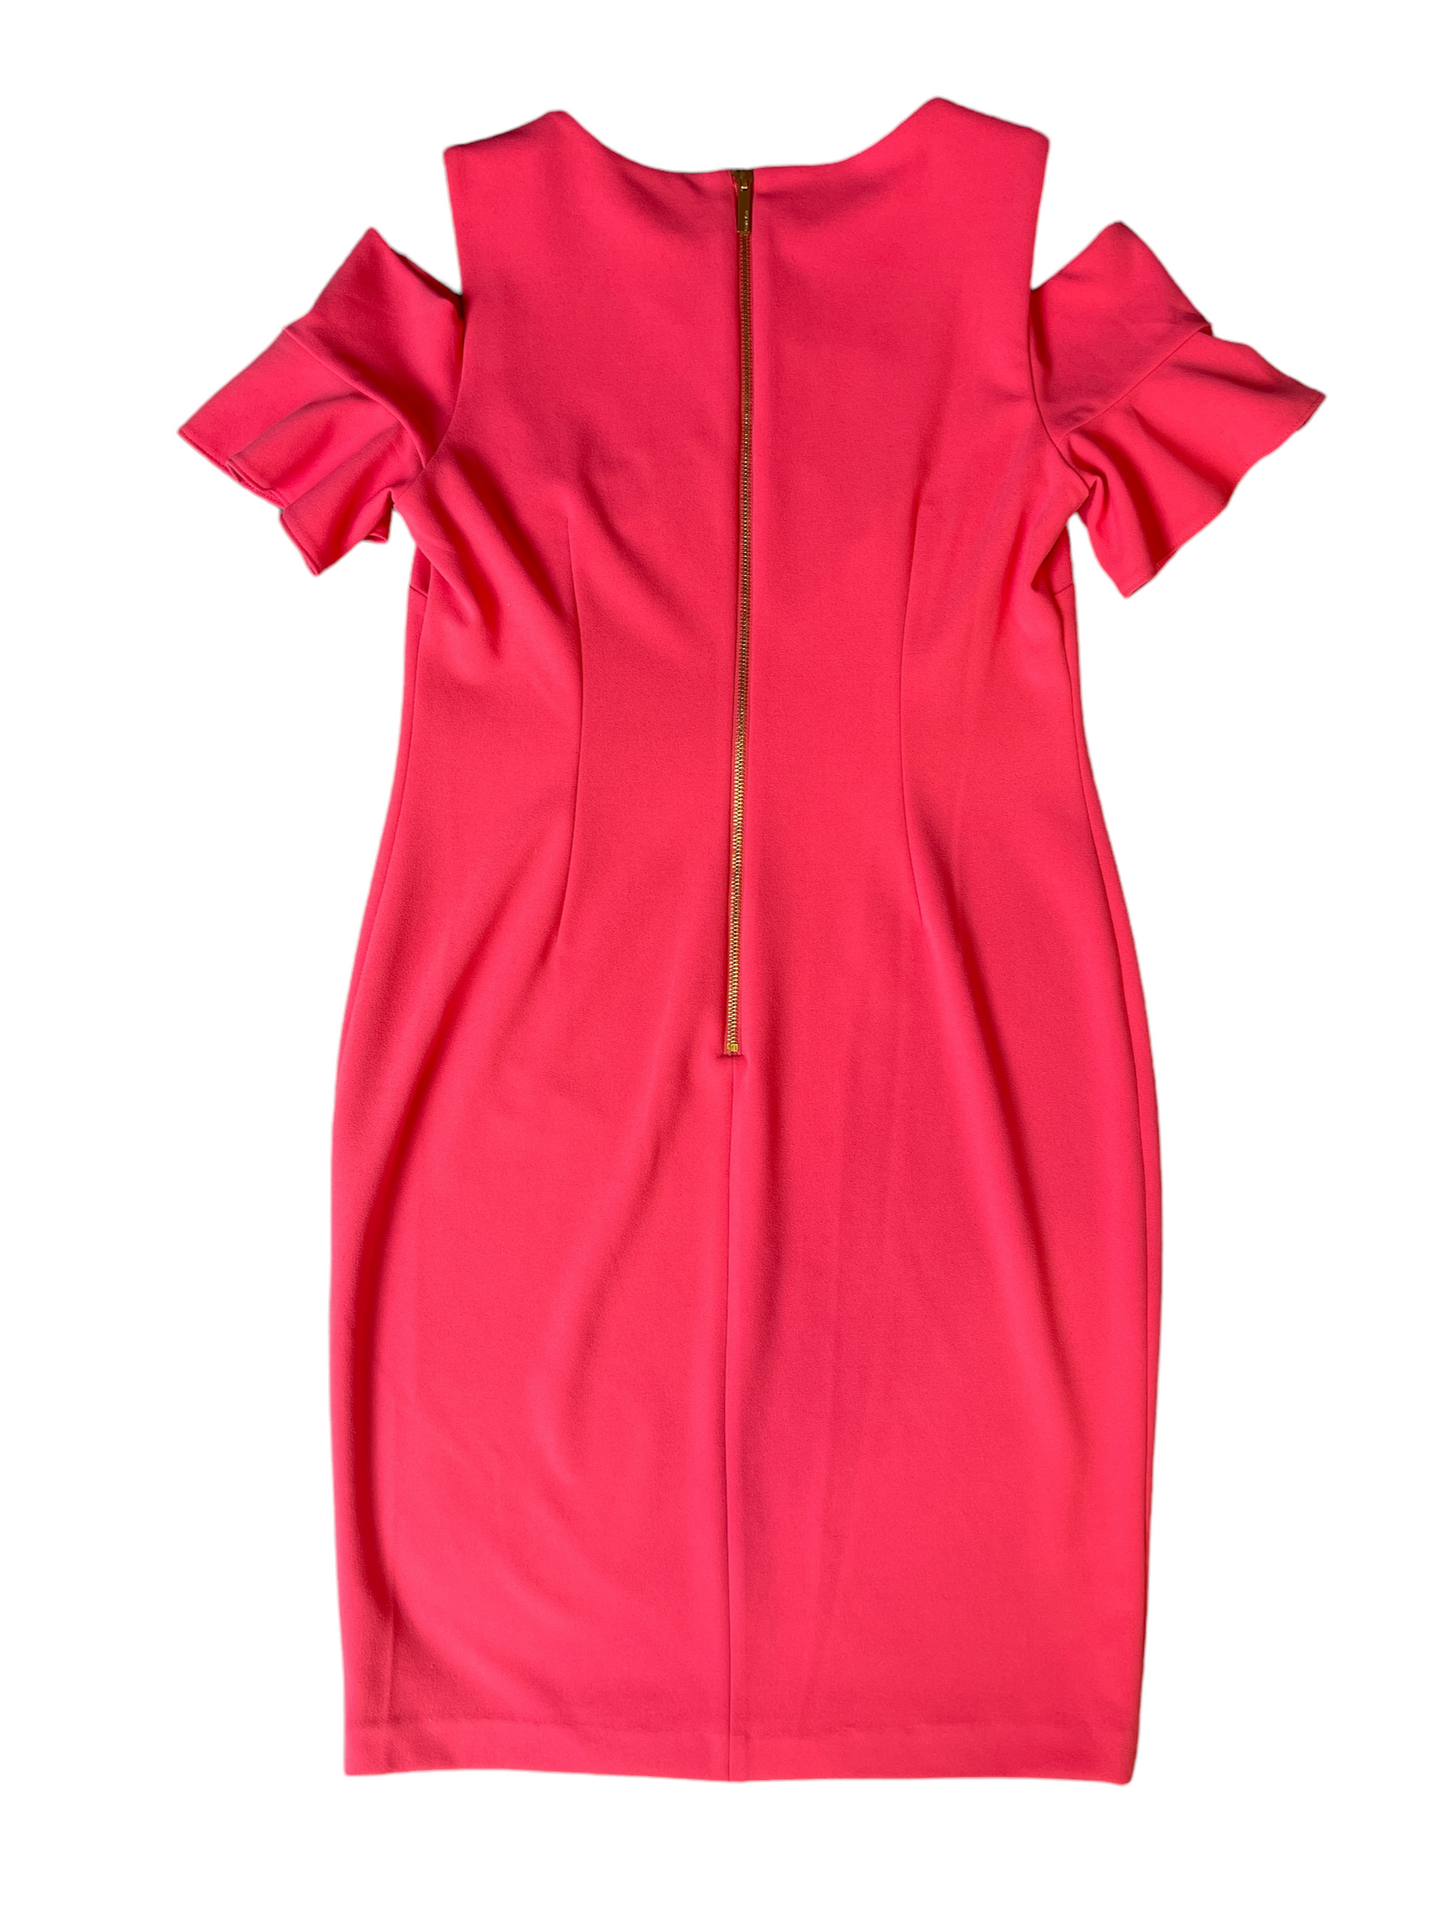 Calvin Klein Coral Dress with Open Shoulder Sleeves and Gold Zipper Size 12